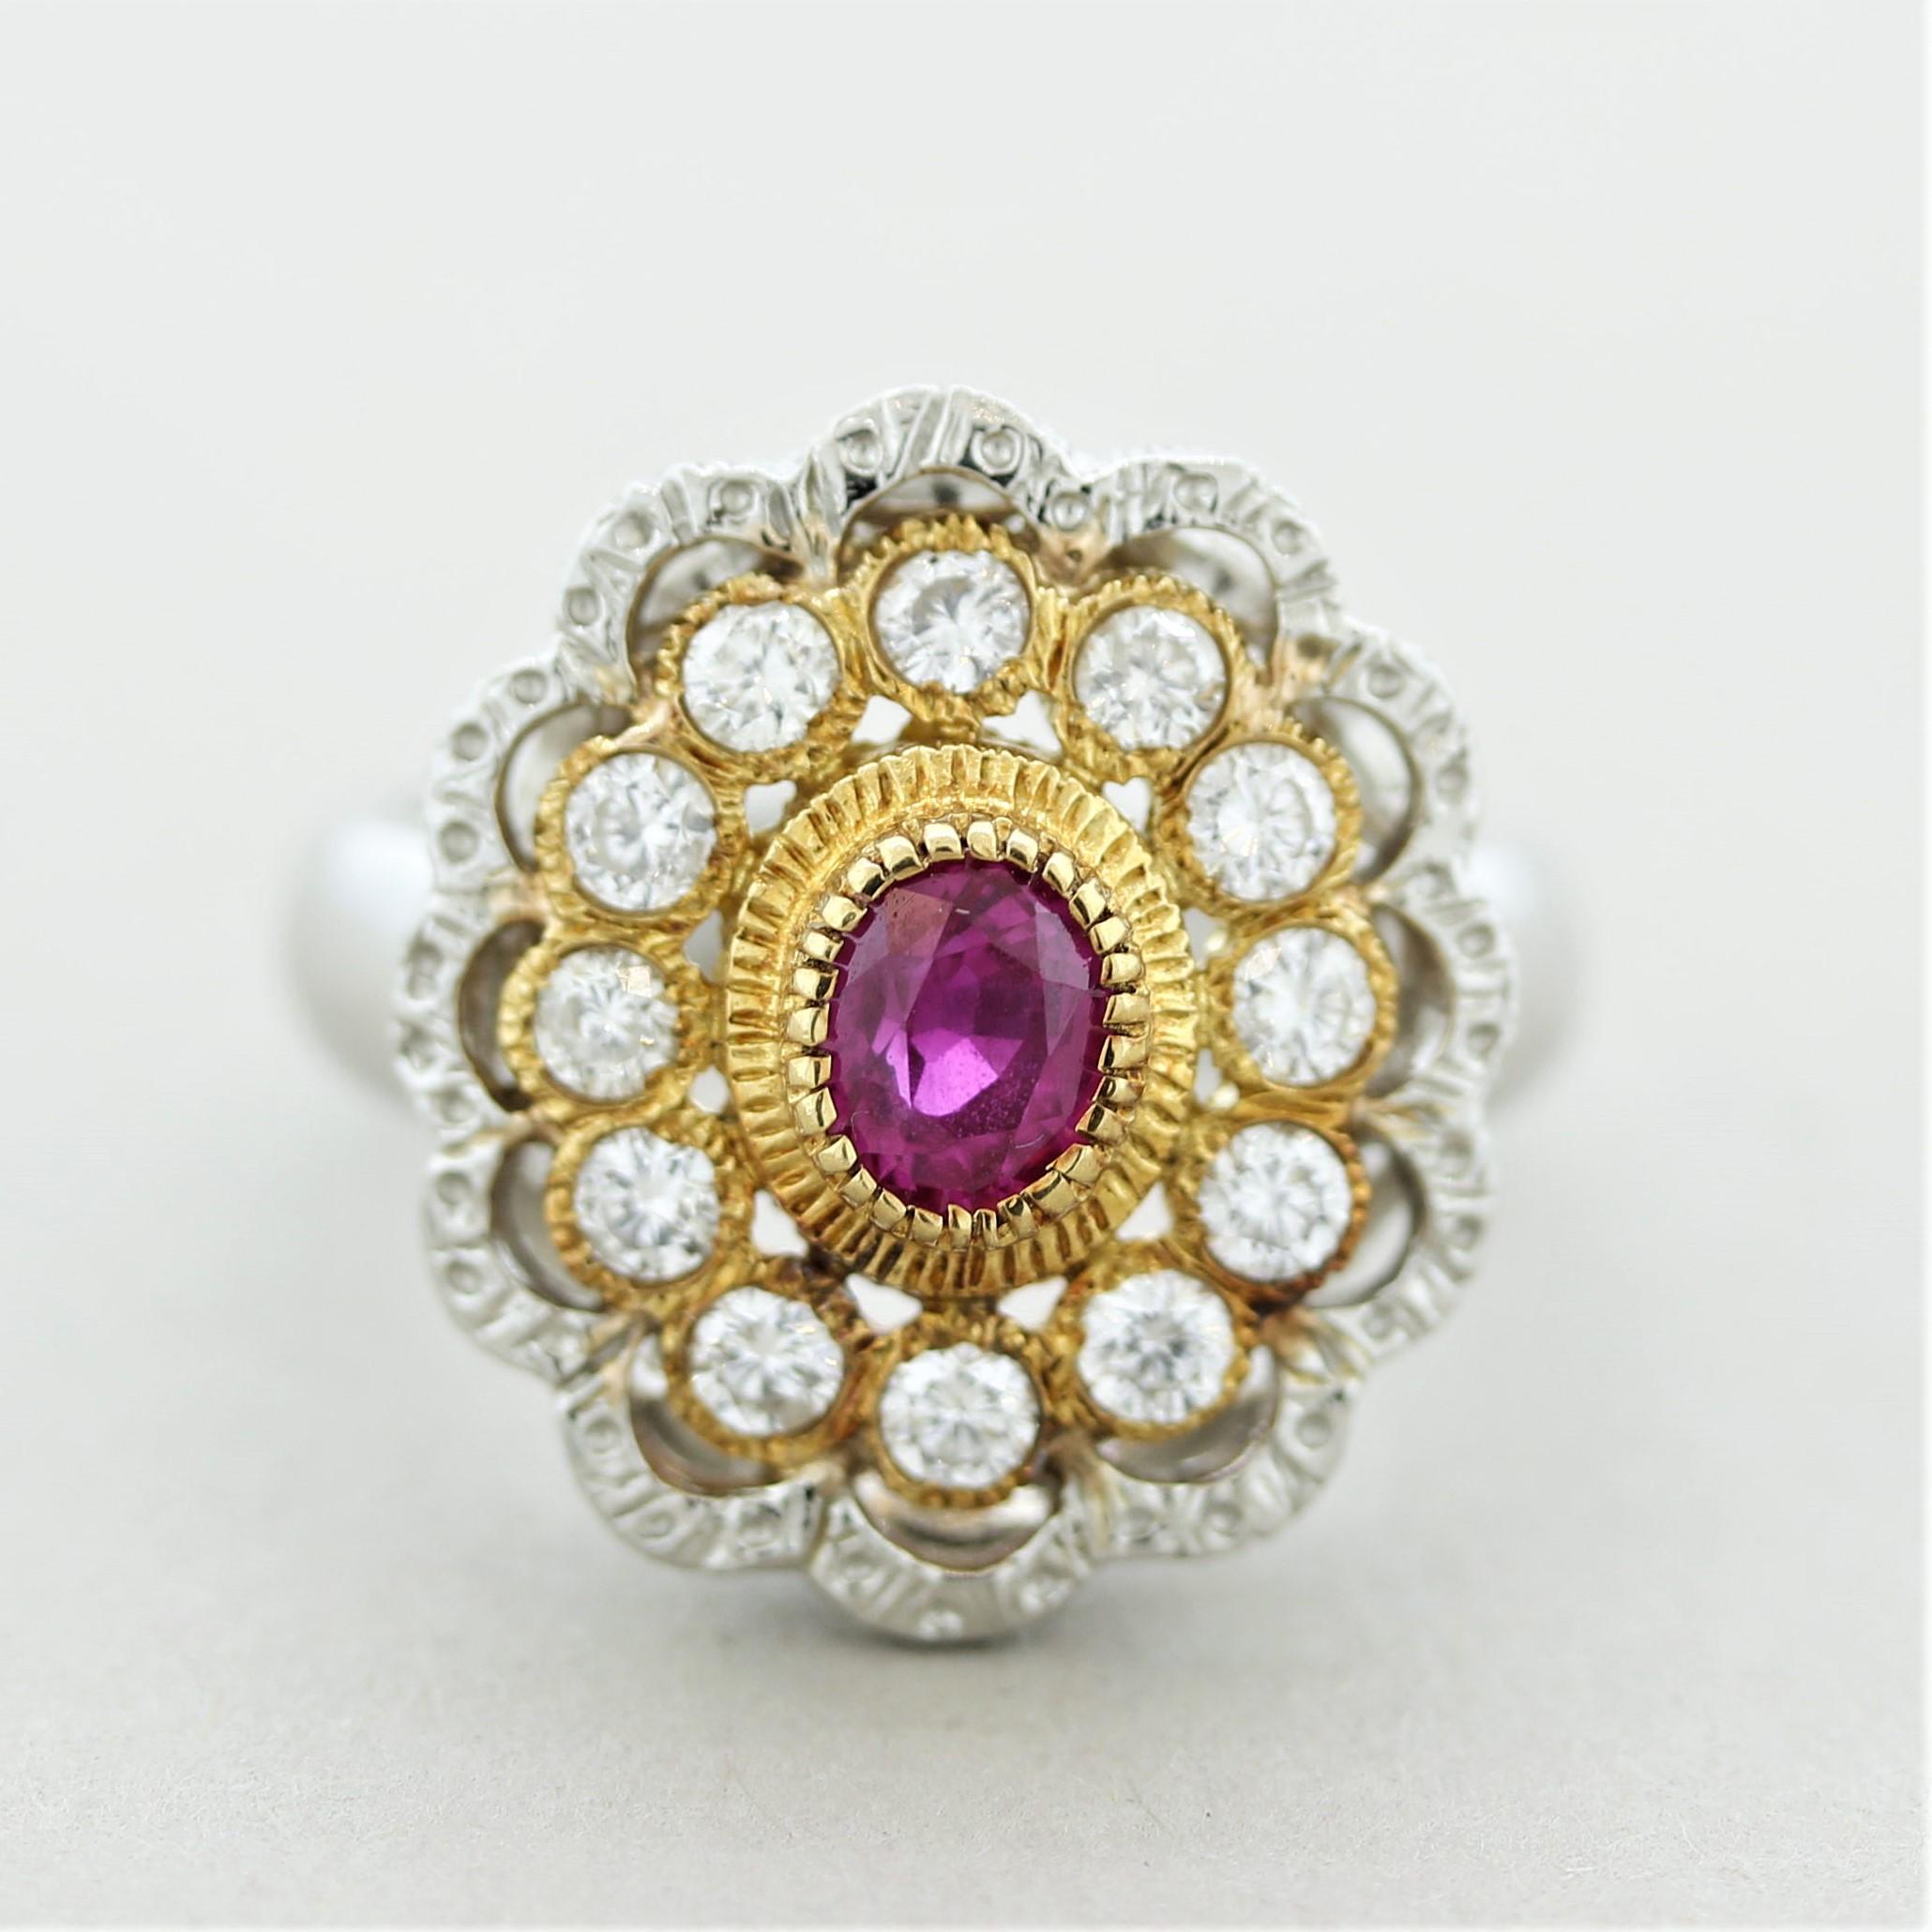 A stylish ring similar in style to Italian jeweler’s Buccellati. It features a 0.82 carat oval-shaped ruby in its center and is complemented by 0.62 carats of round brilliant-cut diamonds. The feature which makes this ring special is the gold and